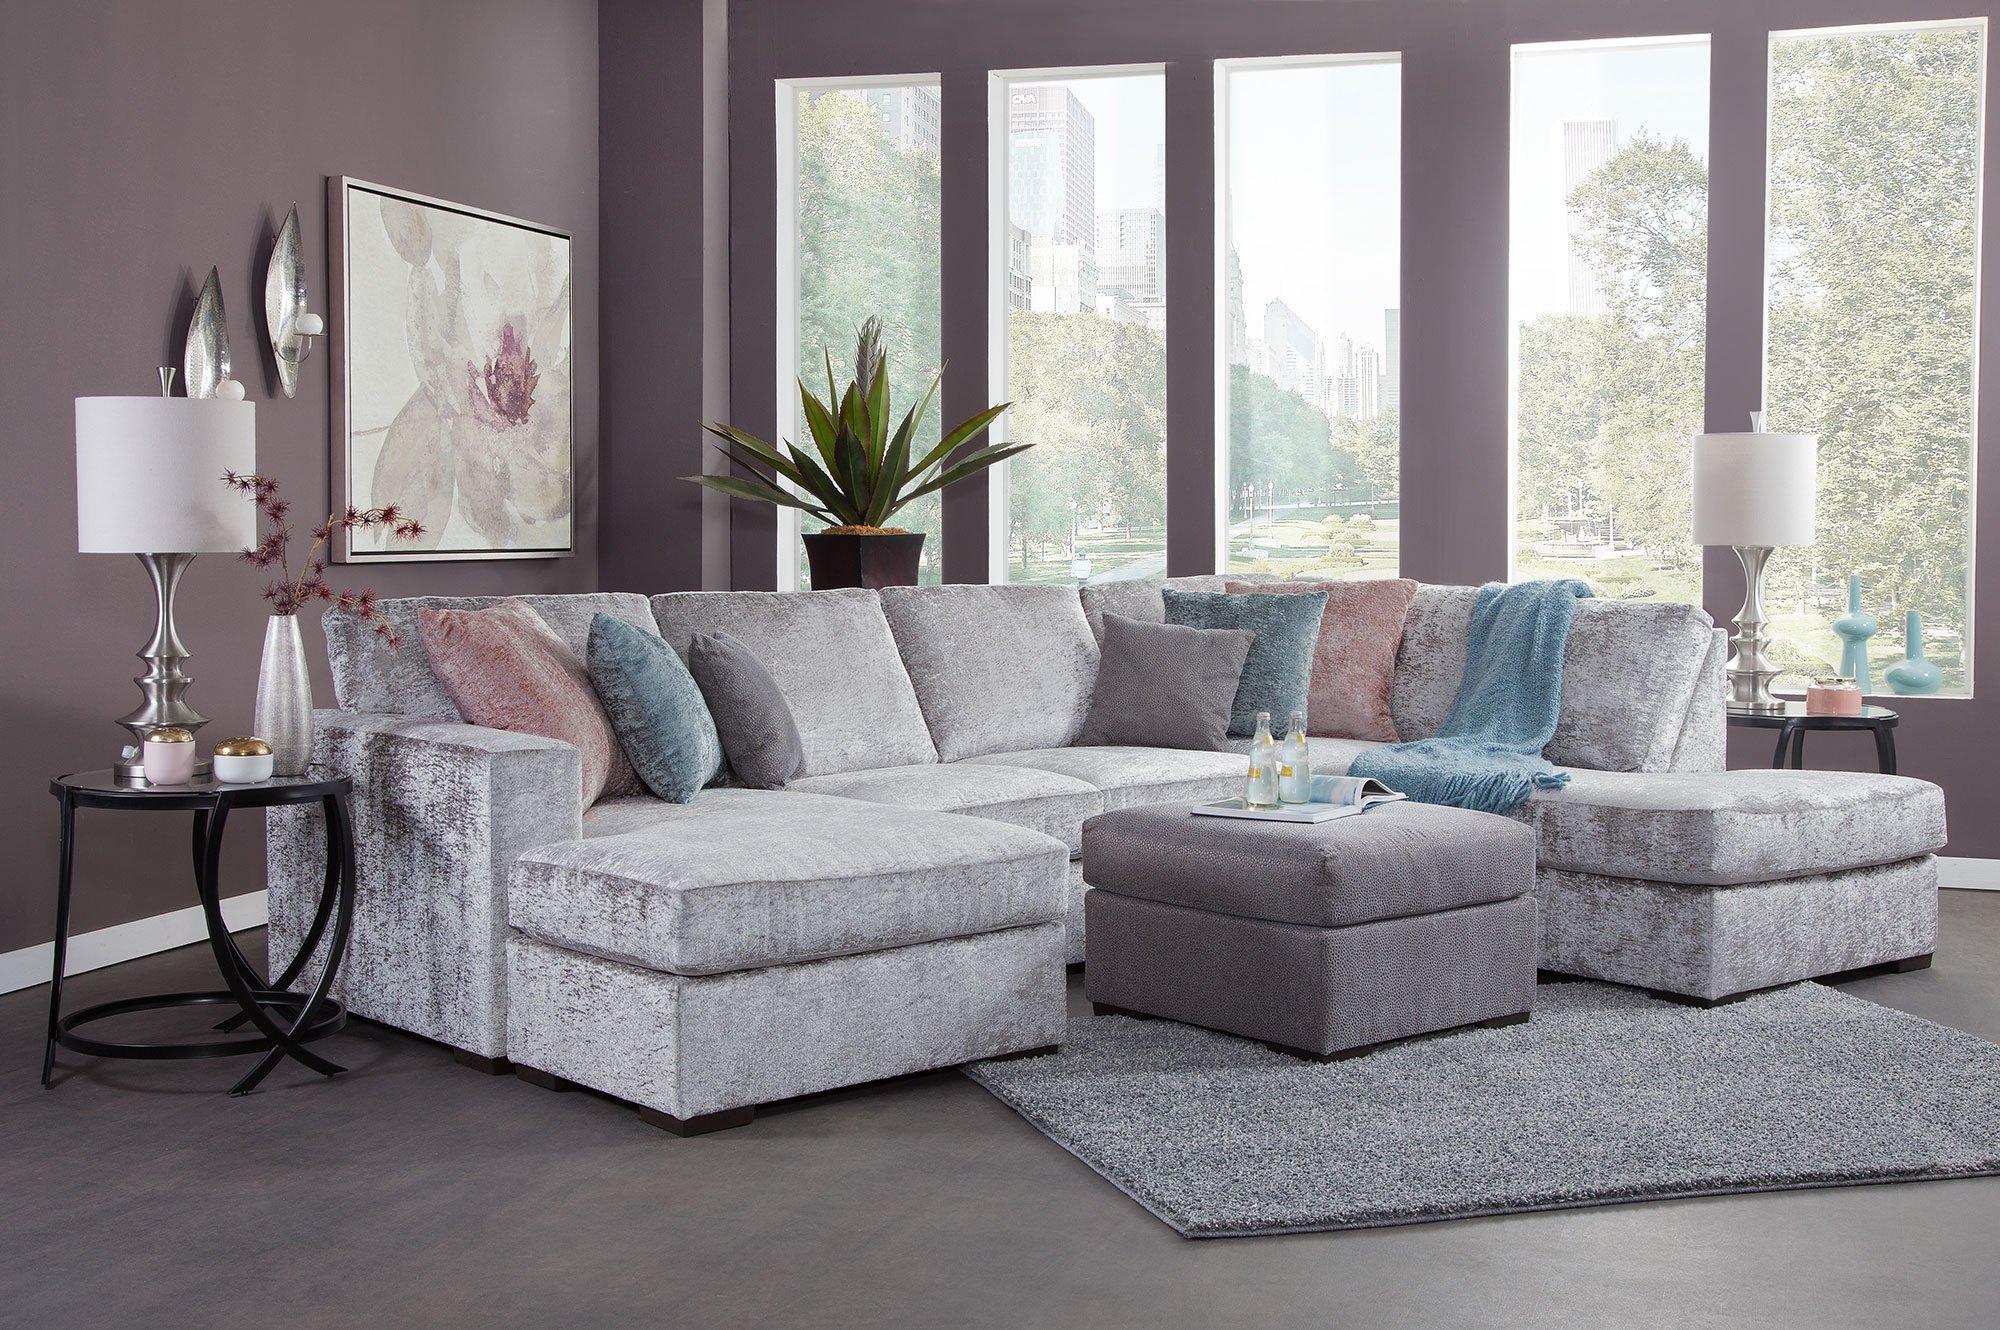 Woodhaven 7 Piece Casablanca Living Room Collection